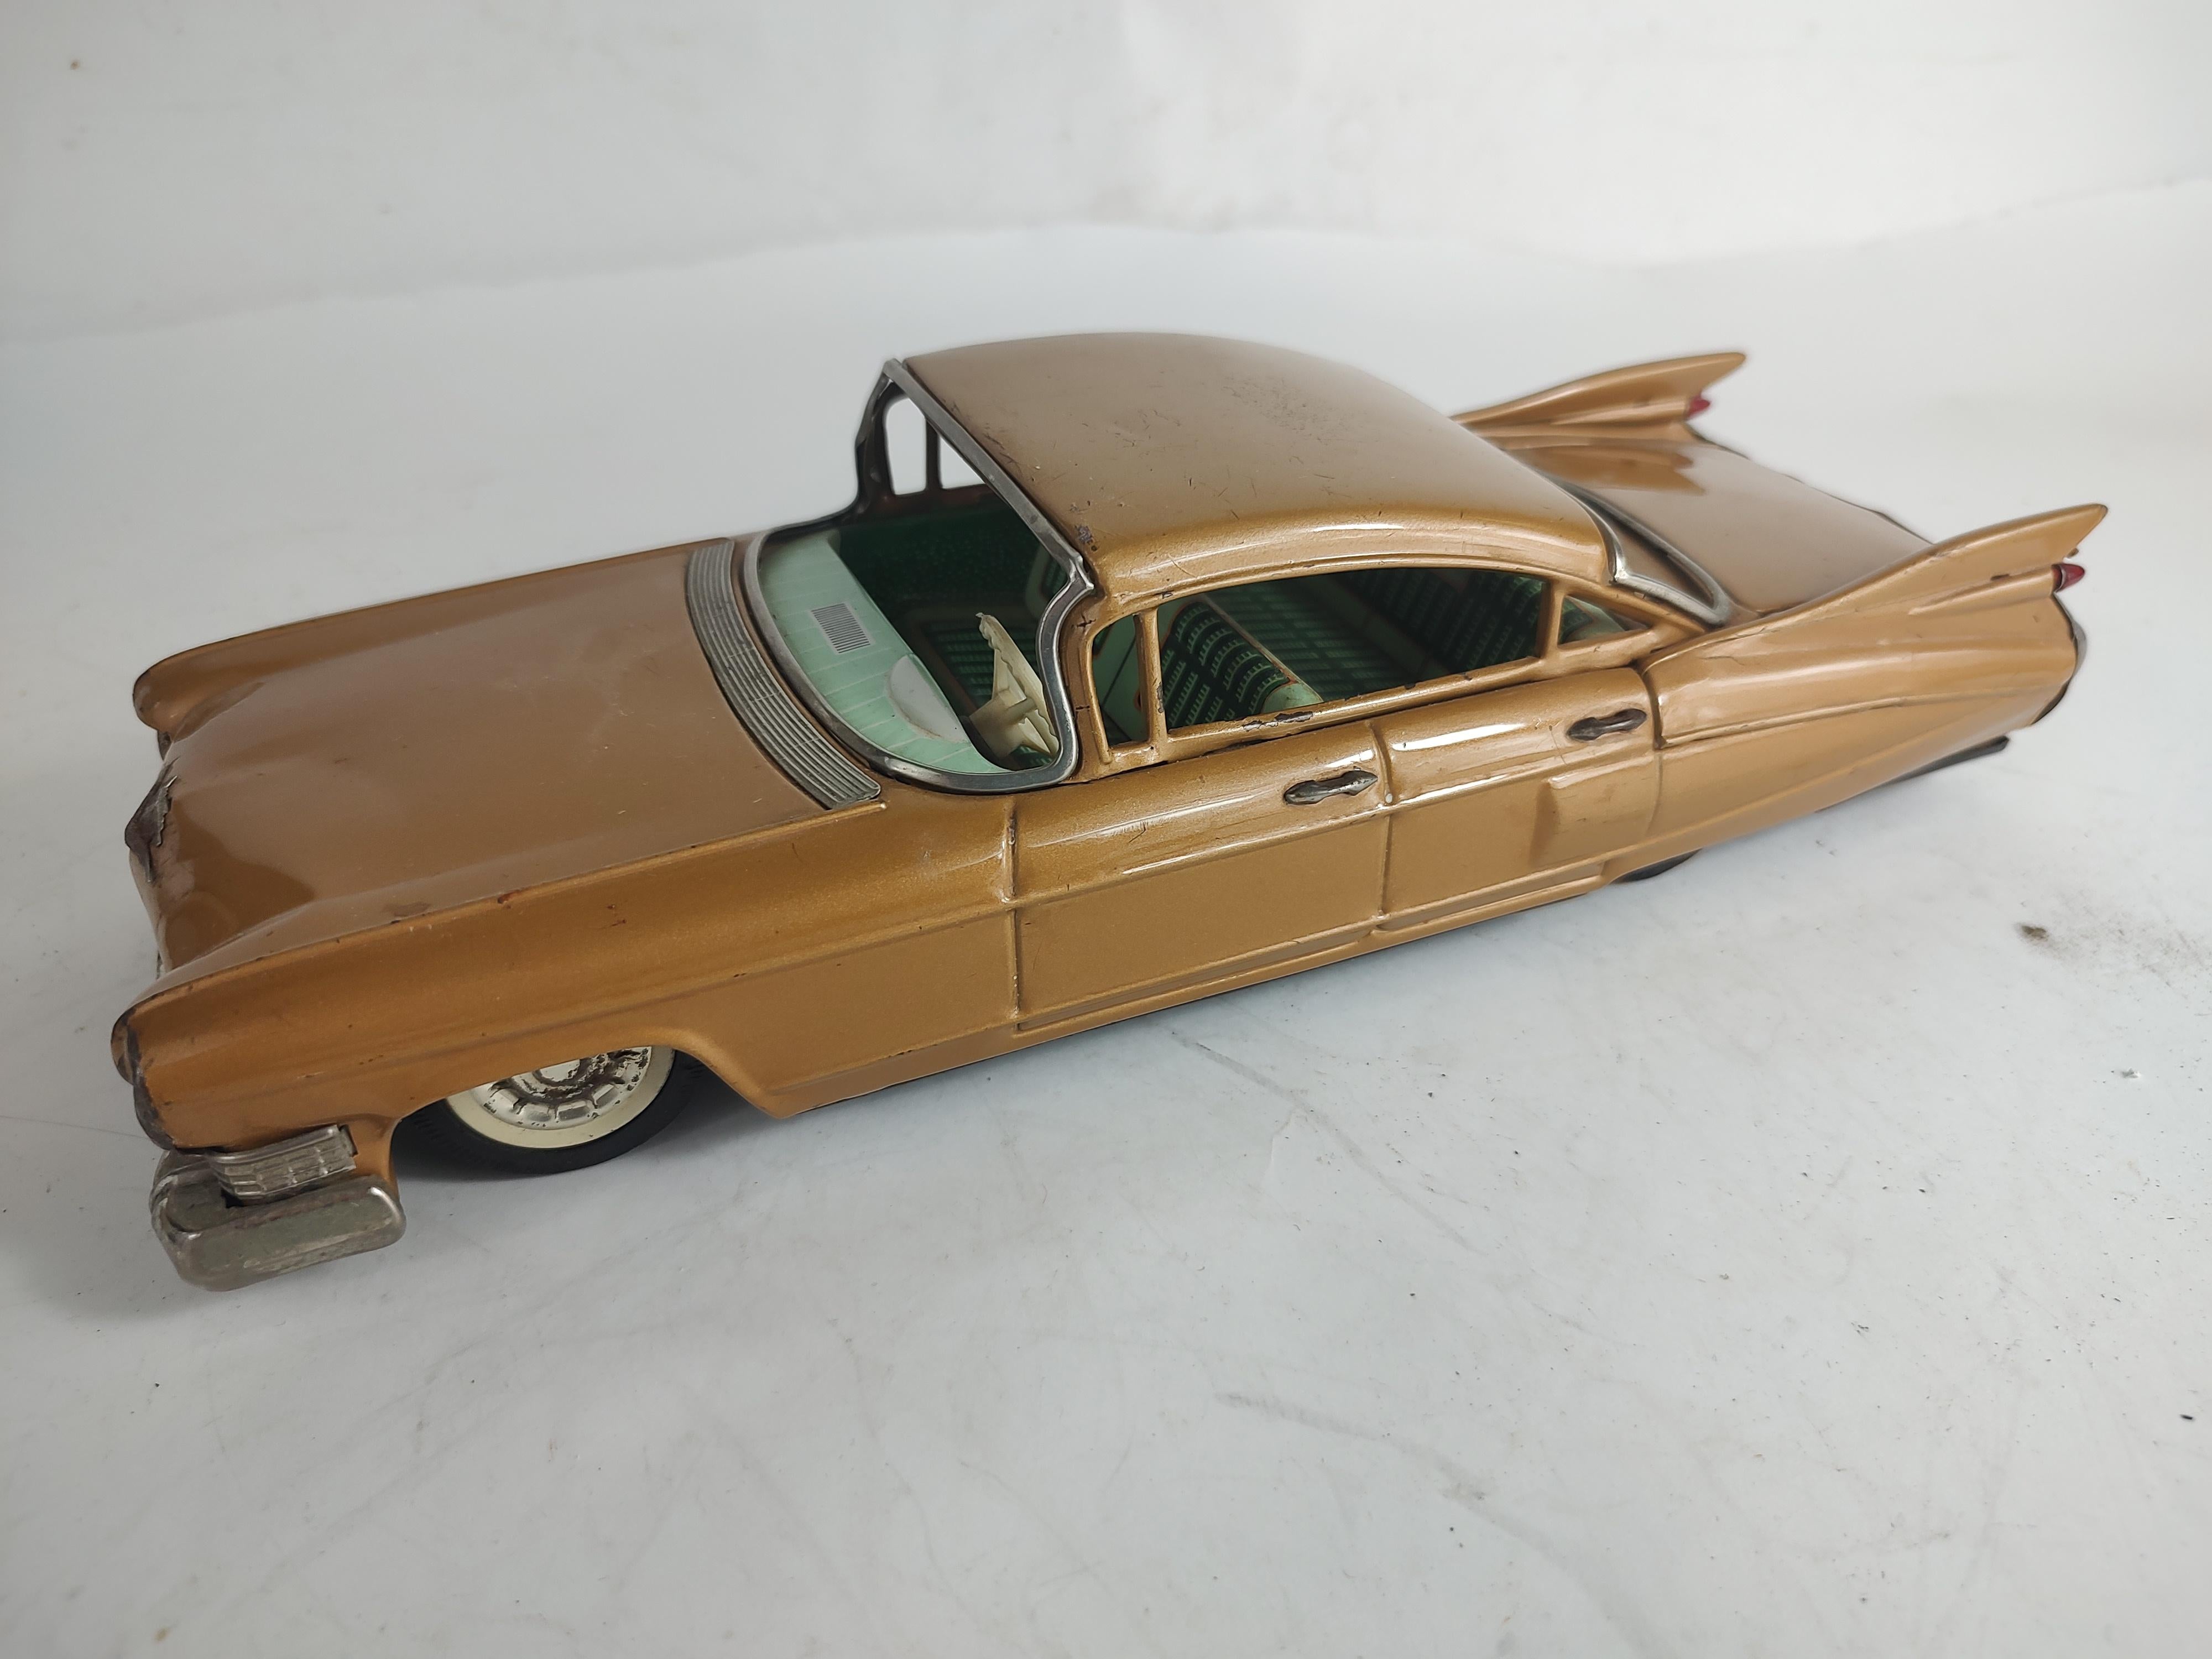 Hand-Crafted Midcentury Tin Litho Toy Car by Bandai Japan 1959 Cadillac 4 Door Sedan For Sale